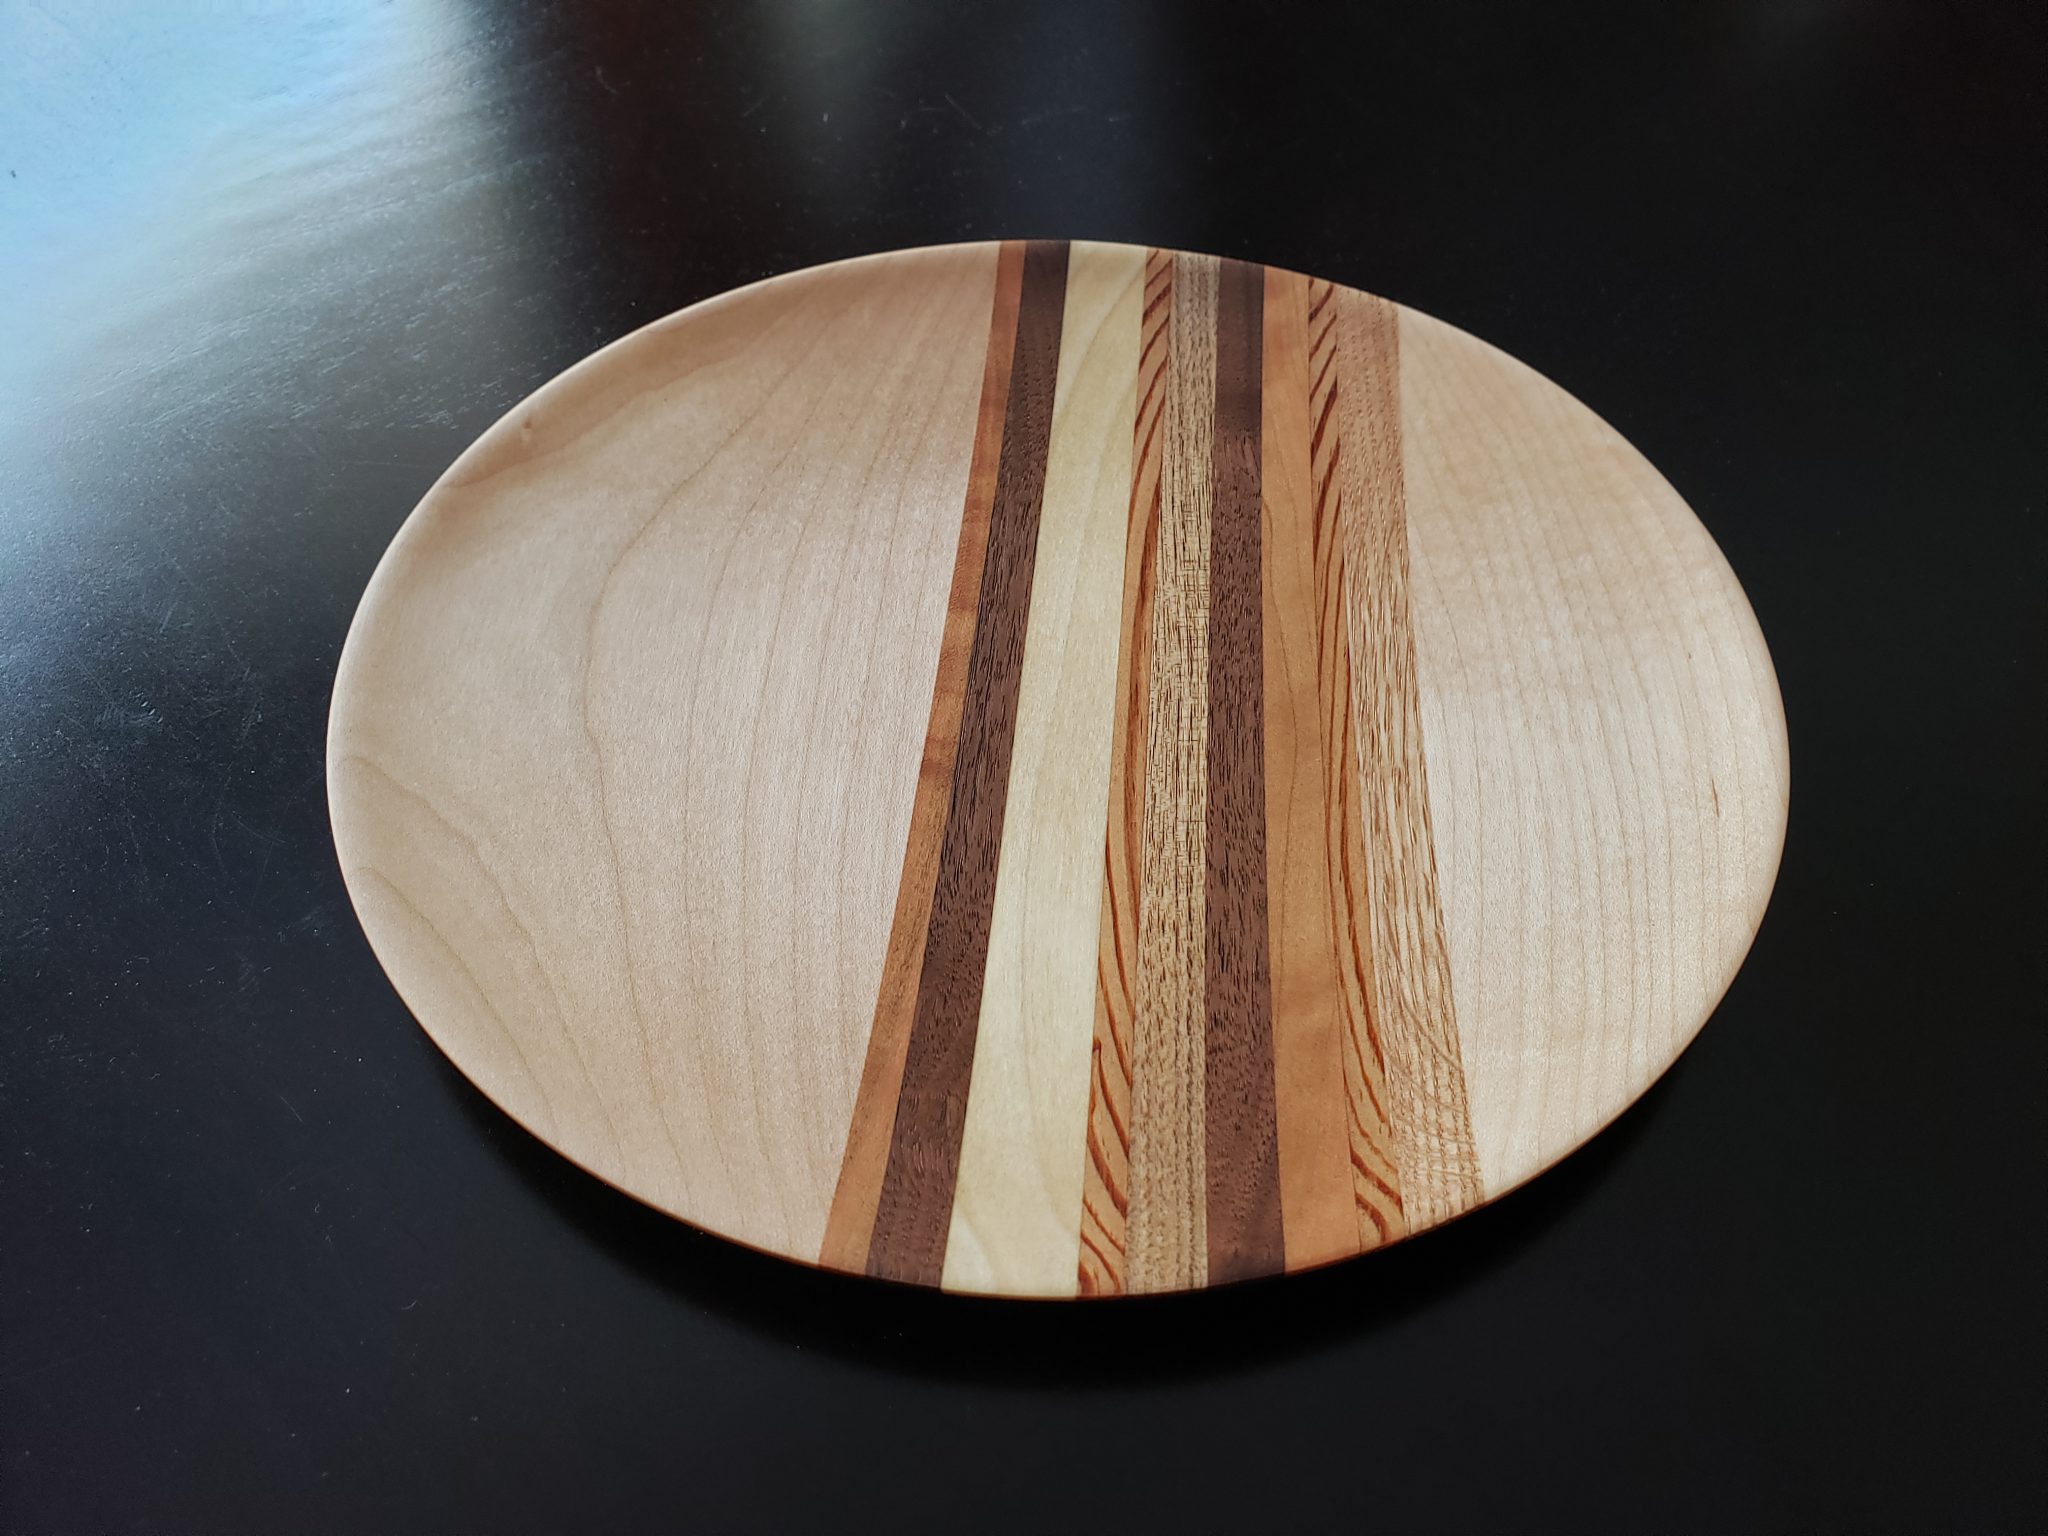 A wooden plate made from shop scraps